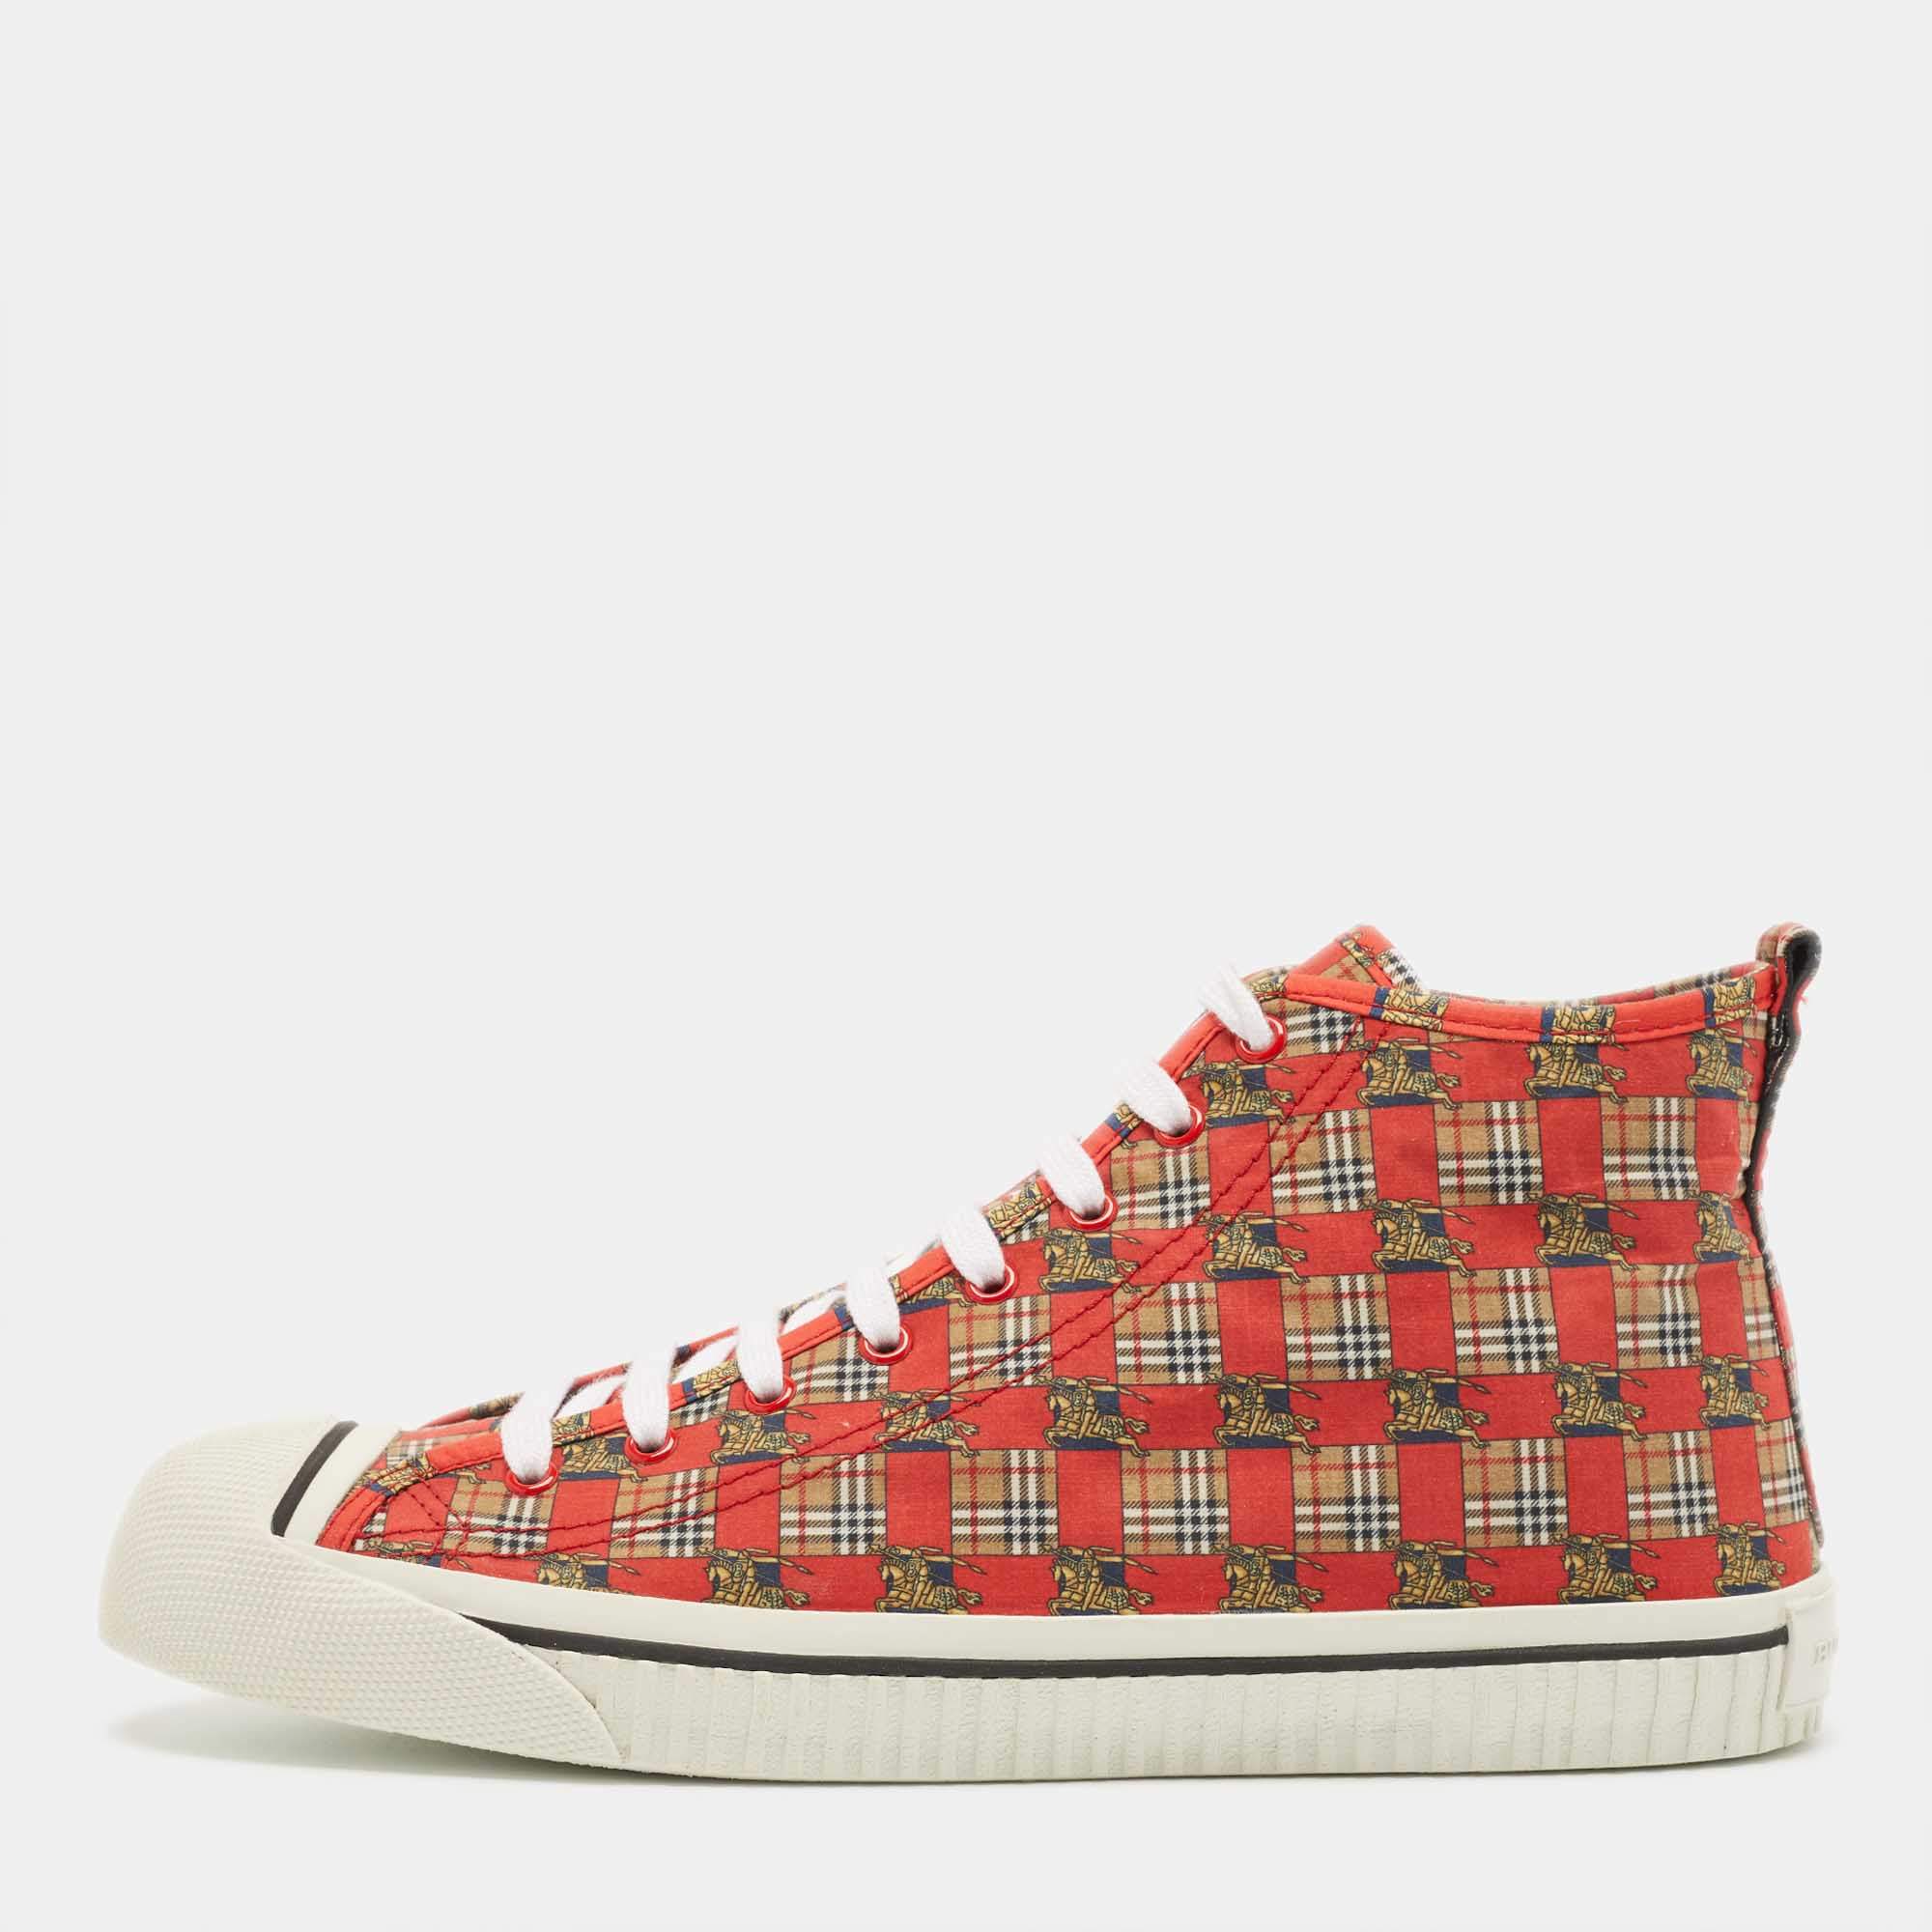 Burberry Red/Beige Canvas Kingly Print High Top Sneakers Size 45